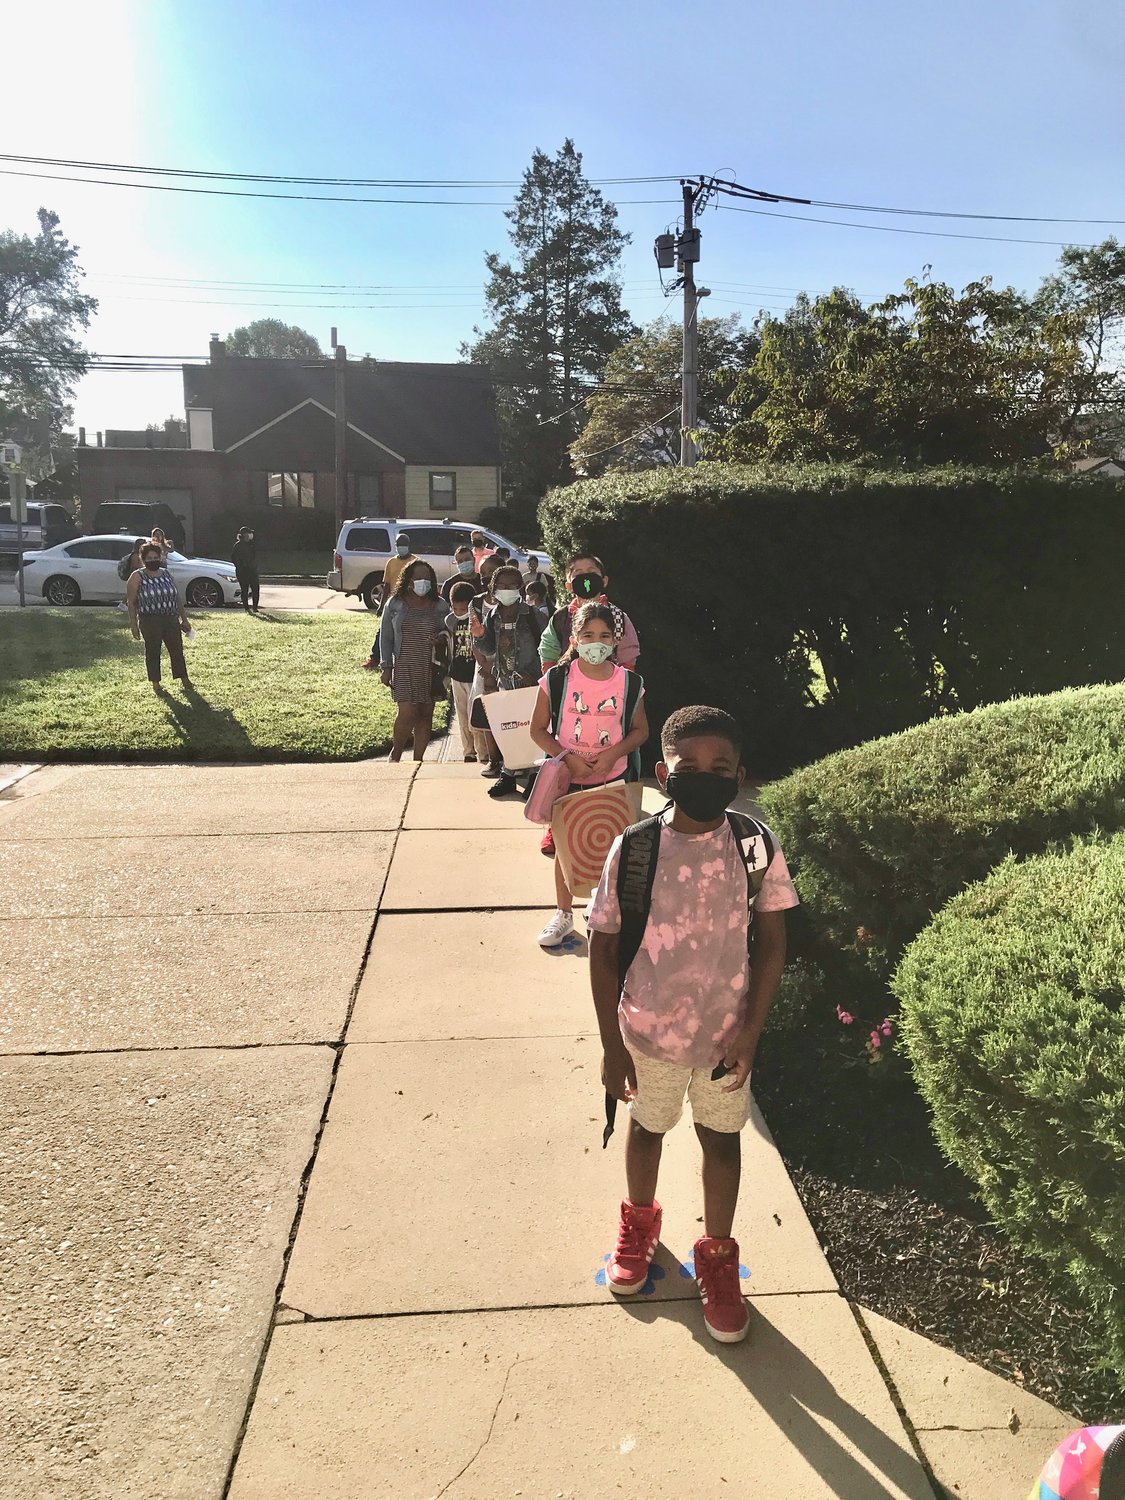 Students lined up at Clear Stream Avenue Elementary School on the morning of Sept. 3 for the first day of school. Parents said that with reduced student density, picking up and dropping off their children has been smoother than usual.